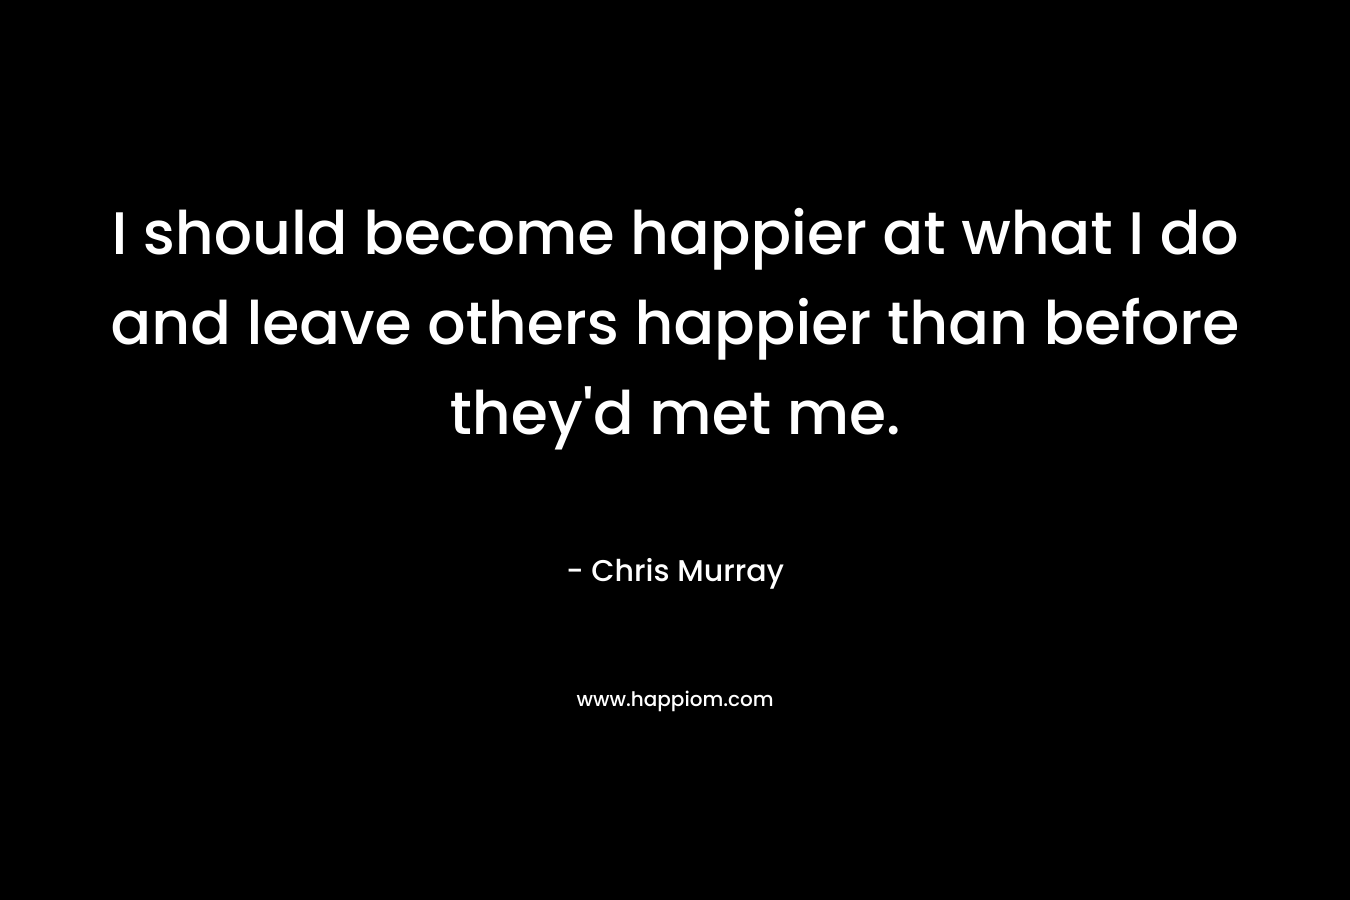 I should become happier at what I do and leave others happier than before they'd met me.